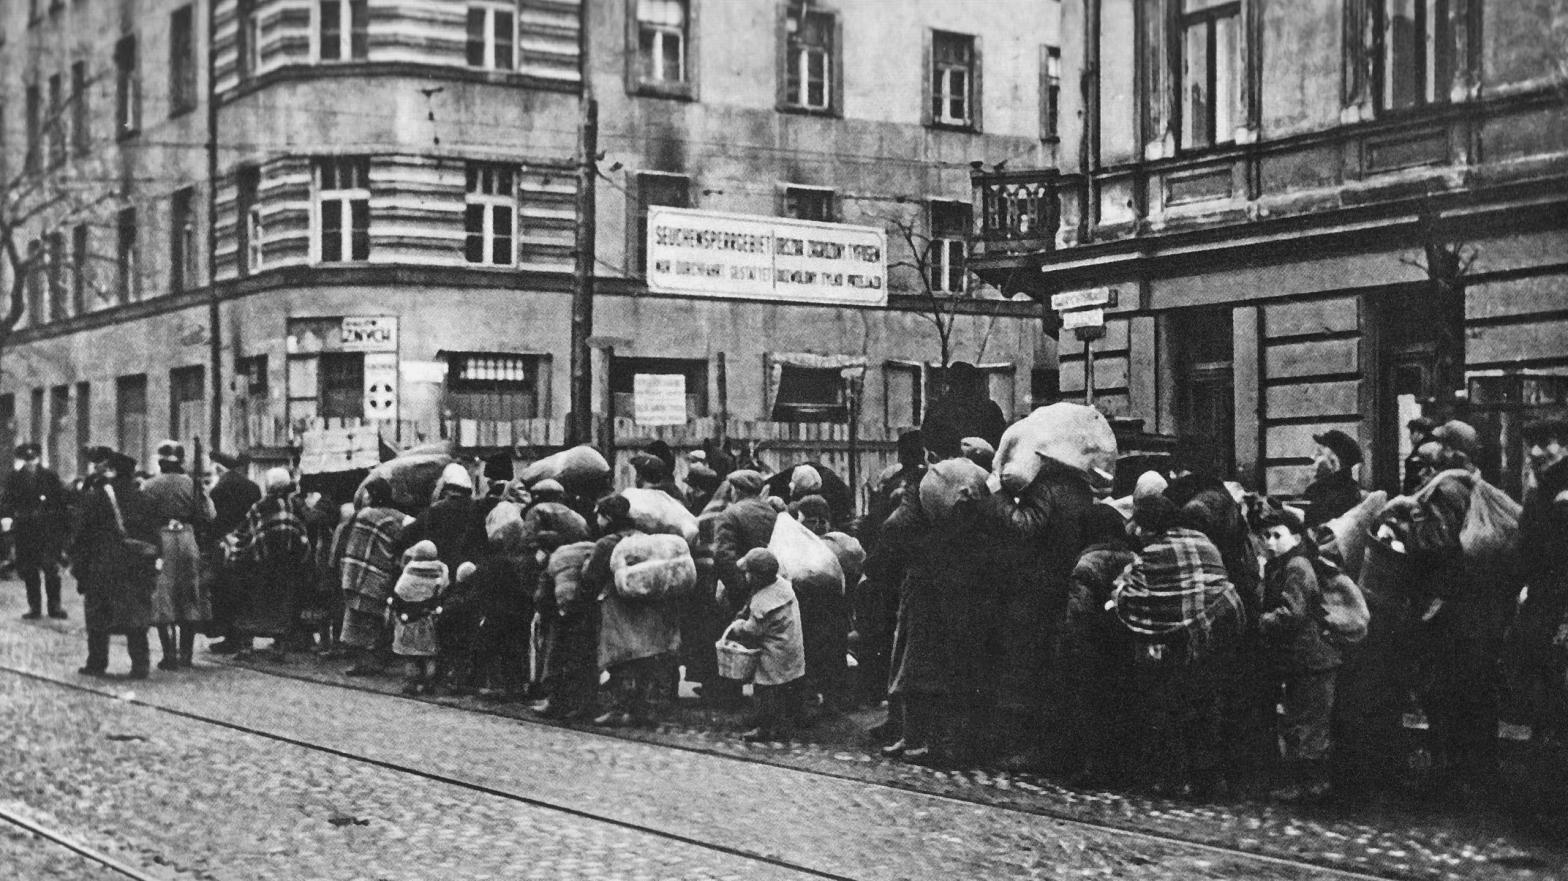 Deportations to the Warsaw Ghetto. Leszno Street near intersection with Żelazna Street. (Photo: unknown/Wikimedia Commons, Fair Use)